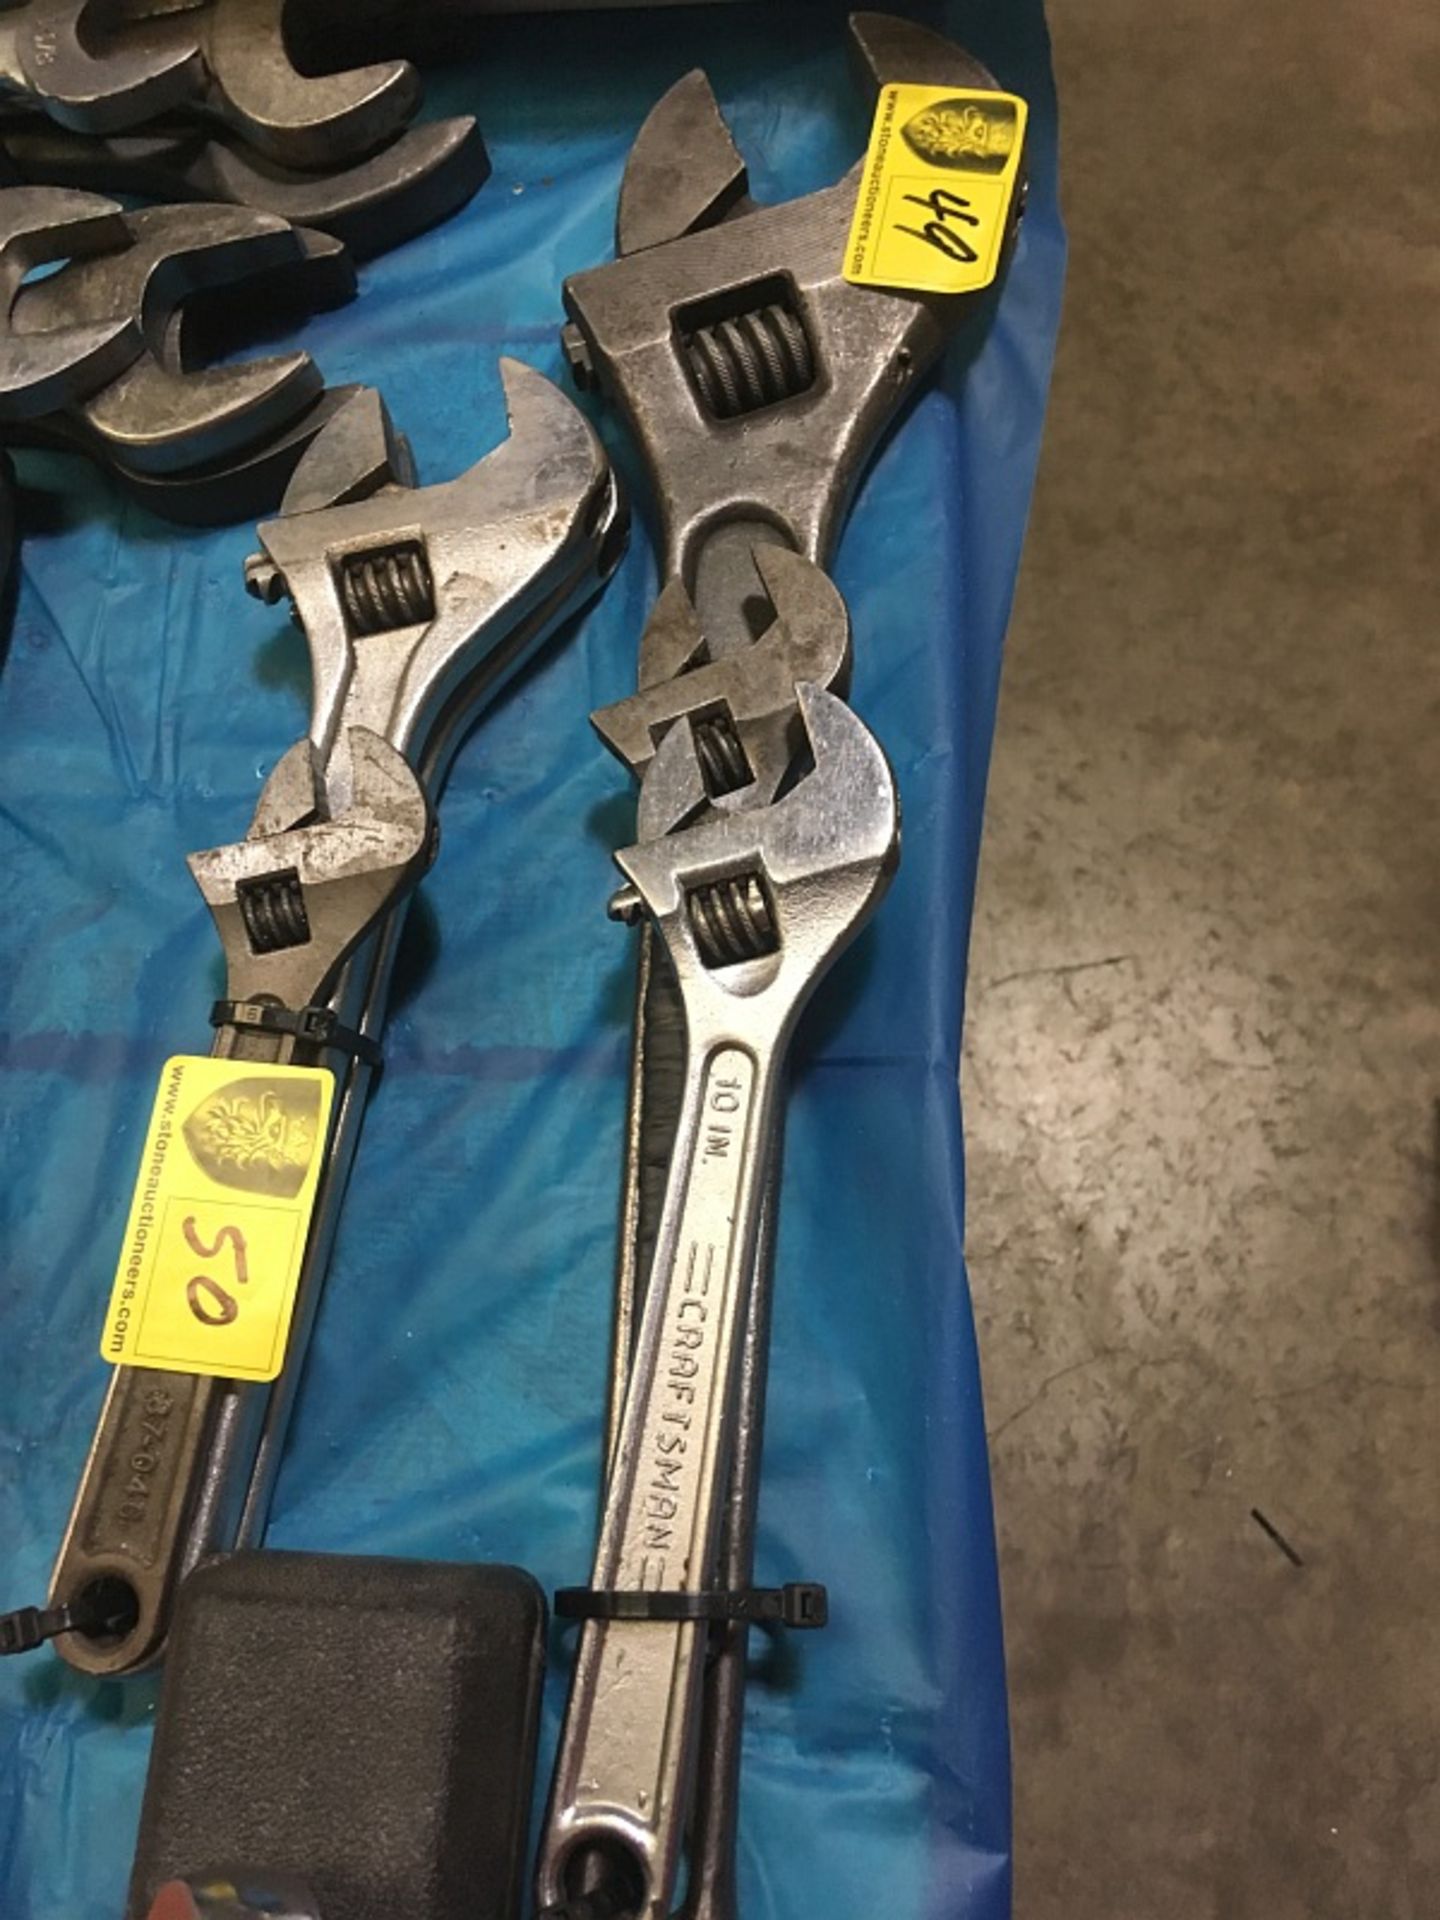 3 Adjustable Wrenches